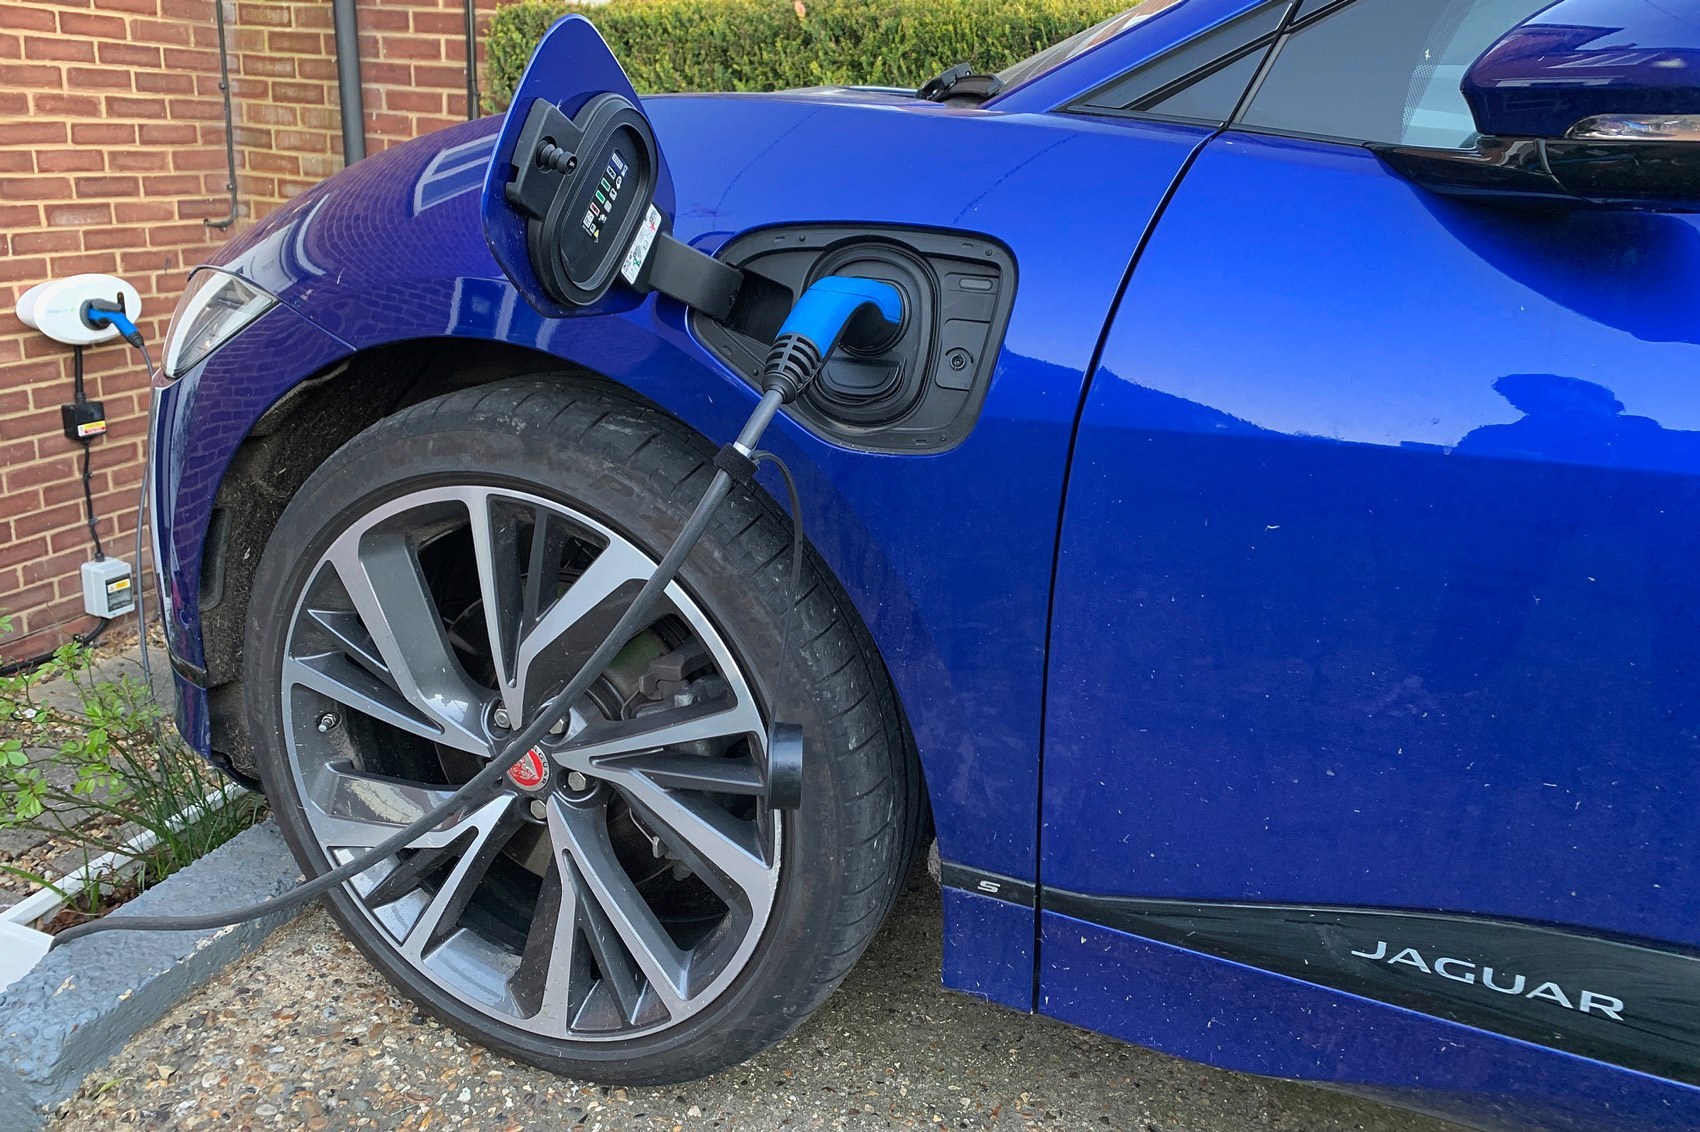 Jaguar i-Pace charging up: home charger